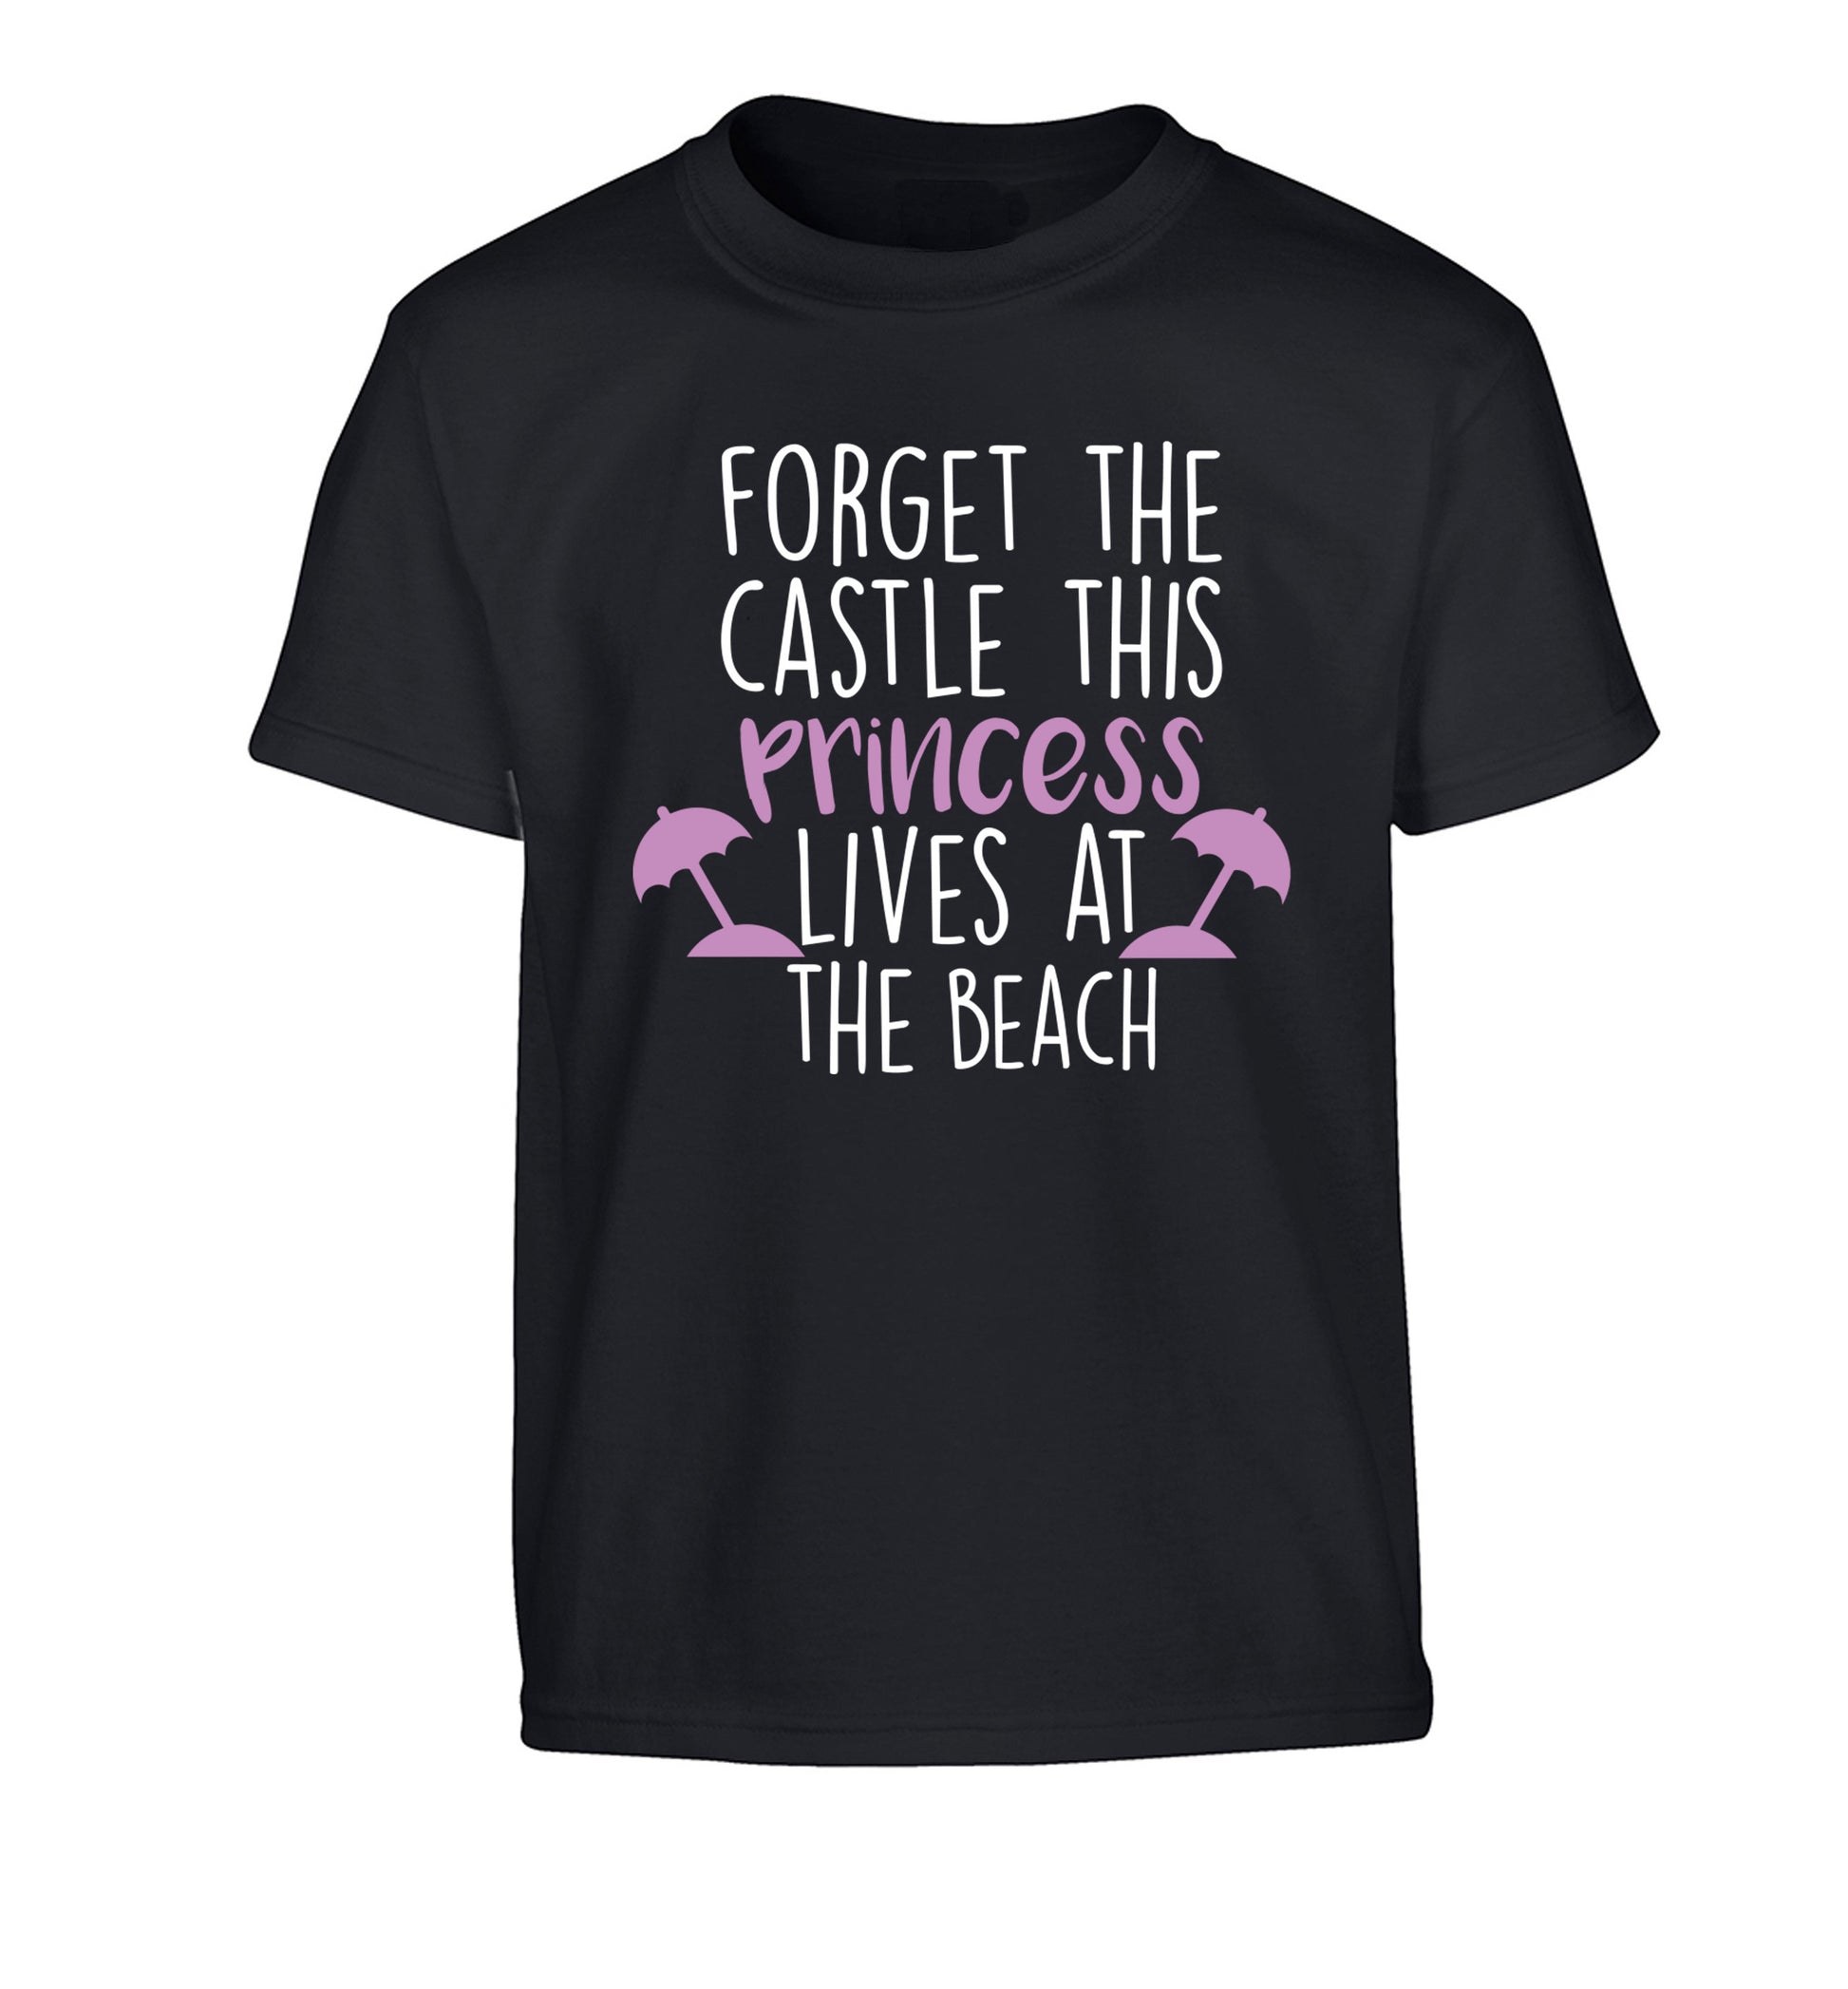 Forget the castle this princess lives at the beach Children's black Tshirt 12-14 Years